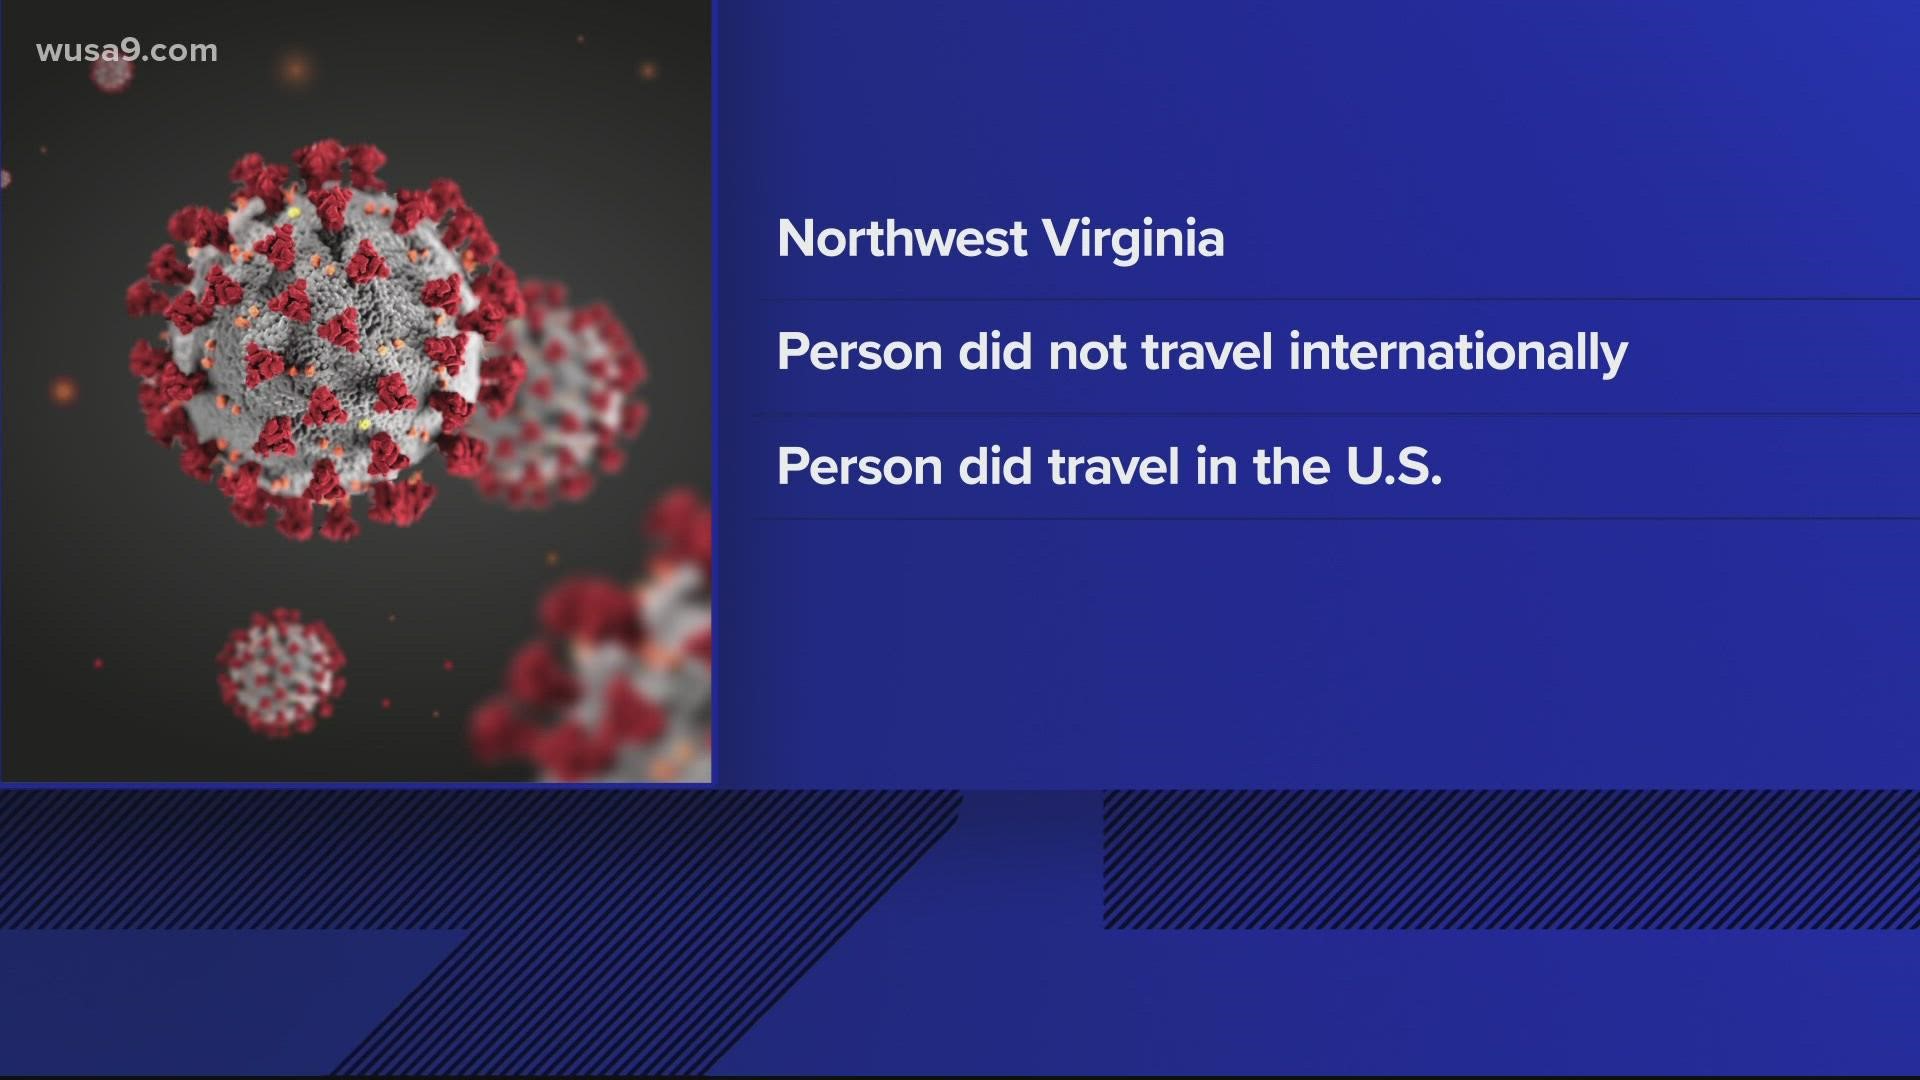 The case was found in Northwest, Va. and the person did not travel internationally.